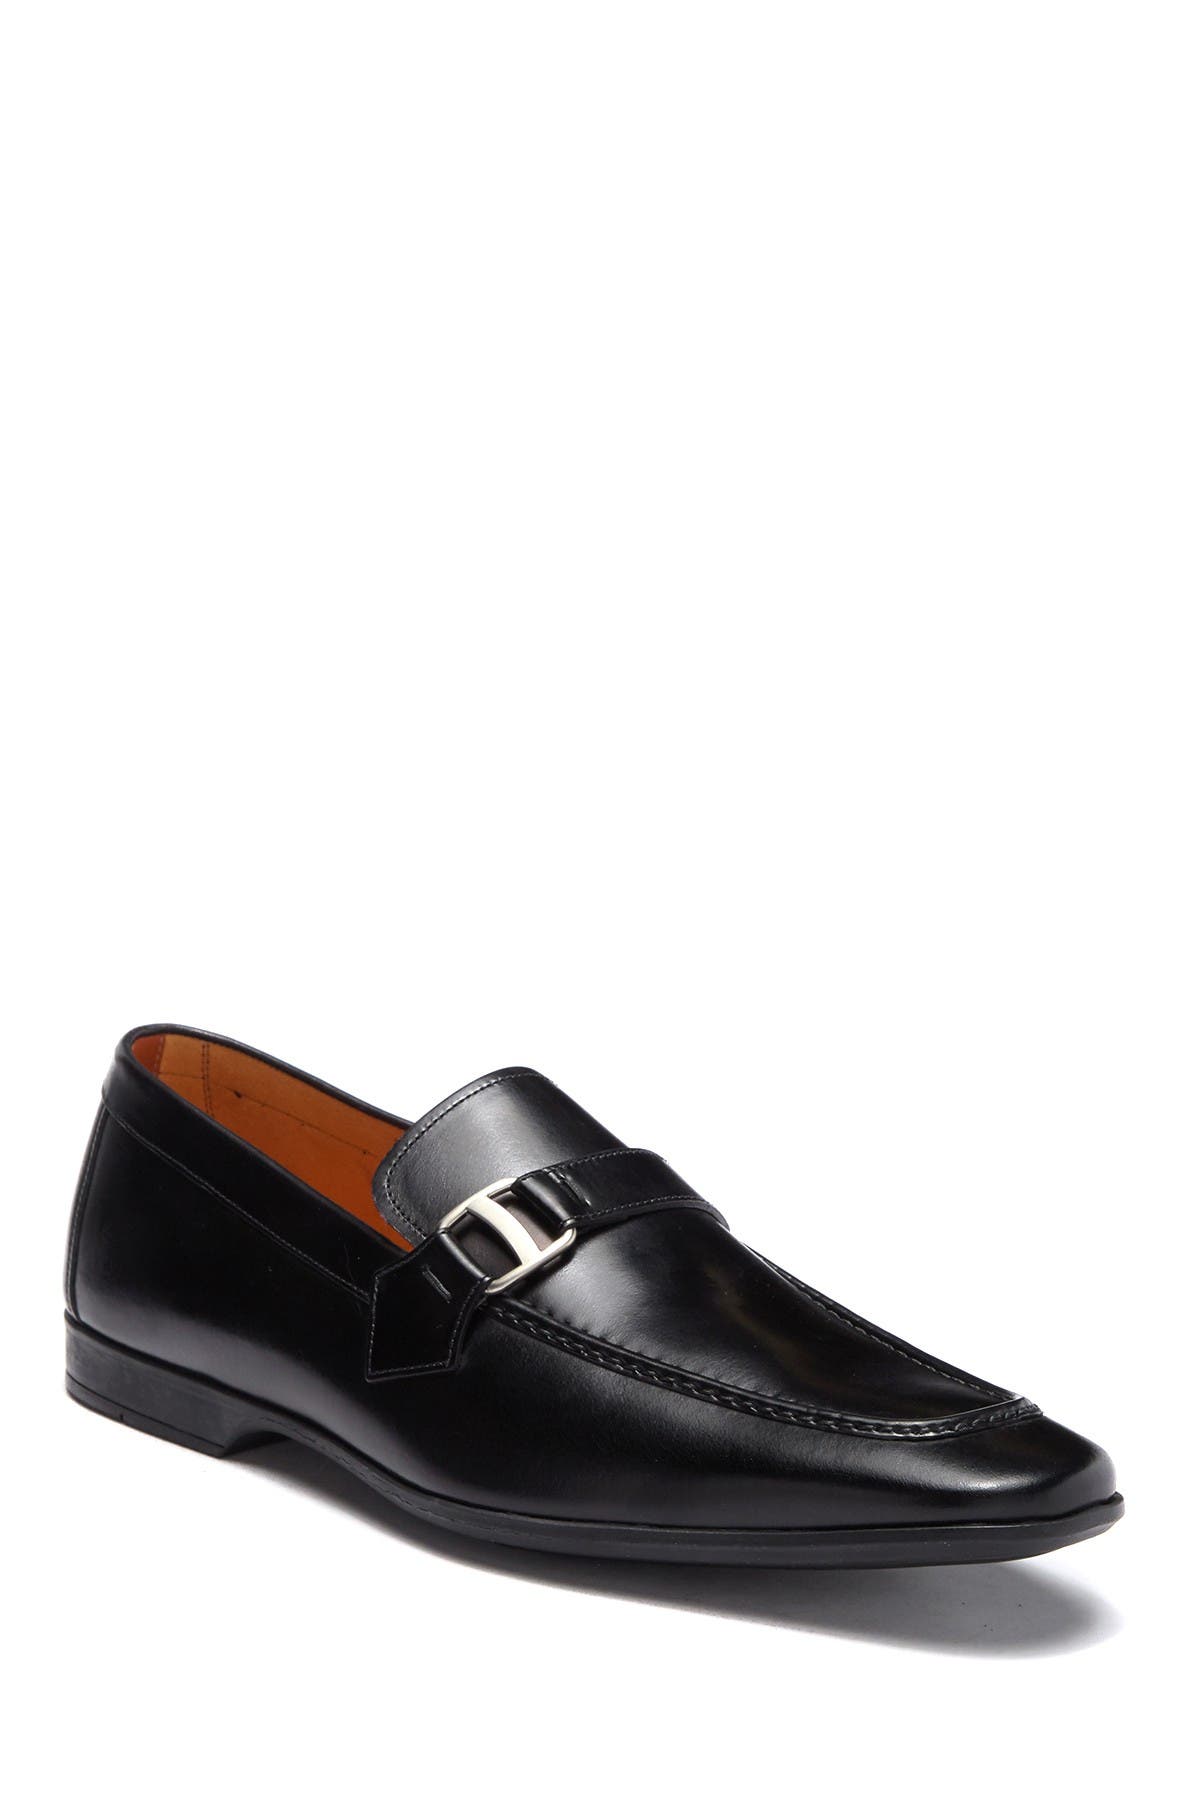 magnanni loafers